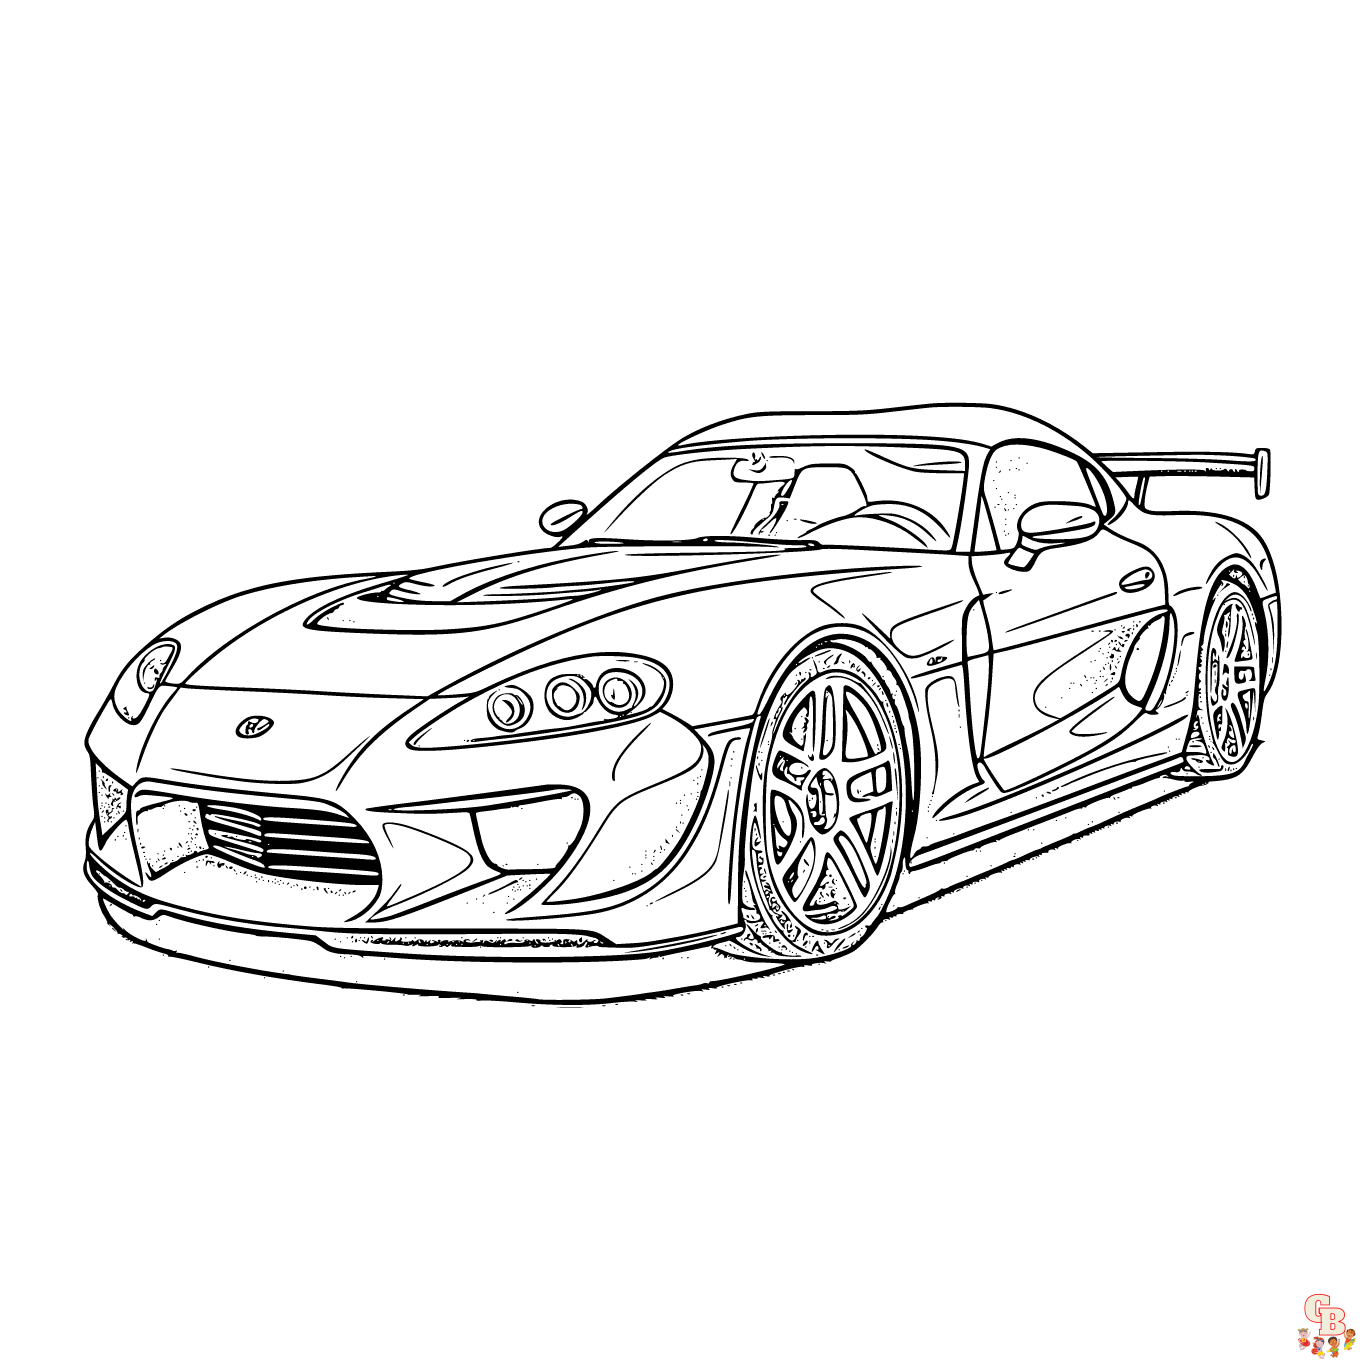 Supra coloring pages to print